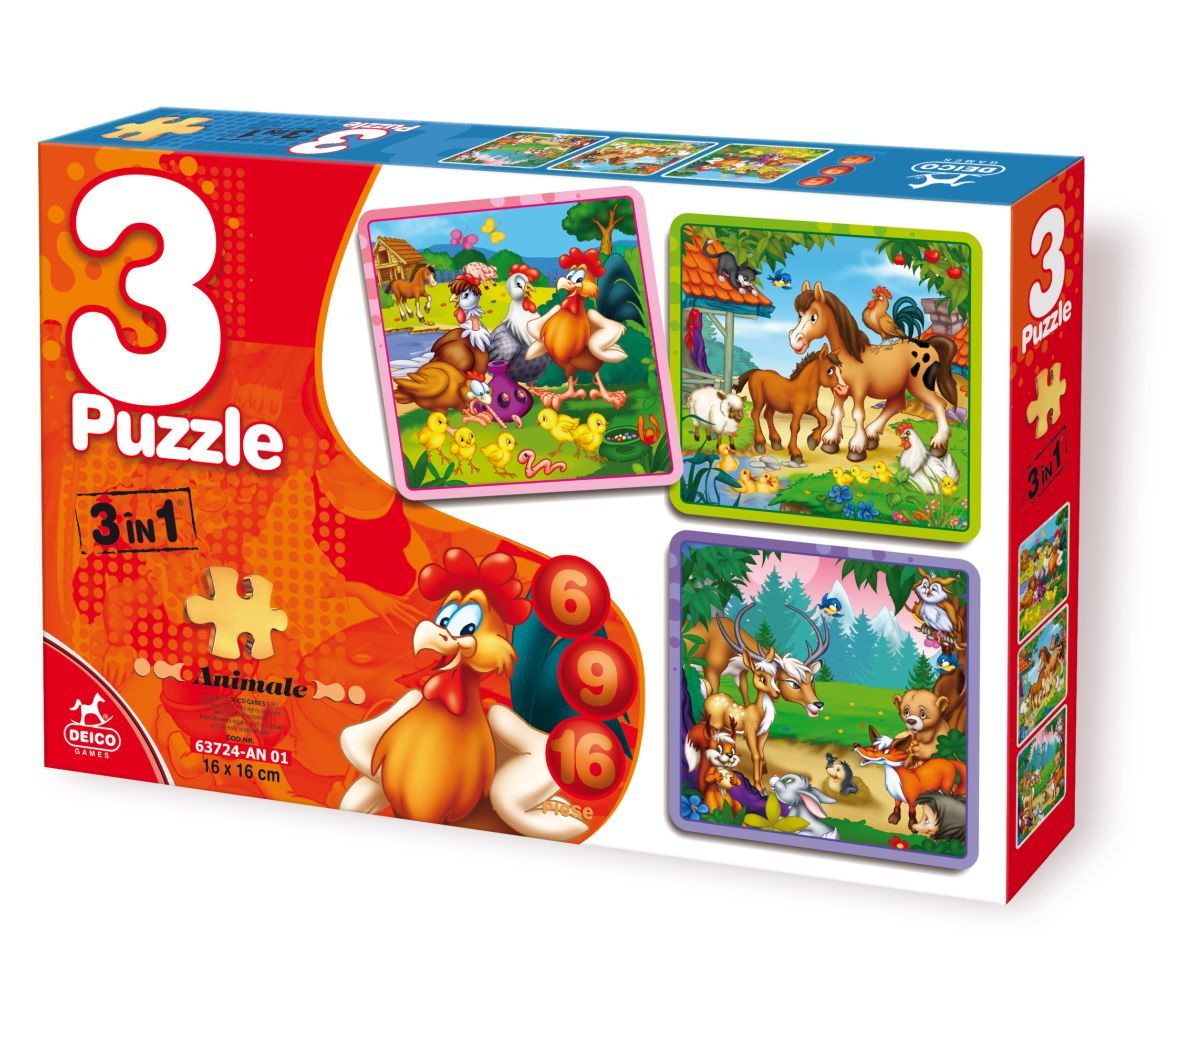 3 in 1 Puzzle: Animale